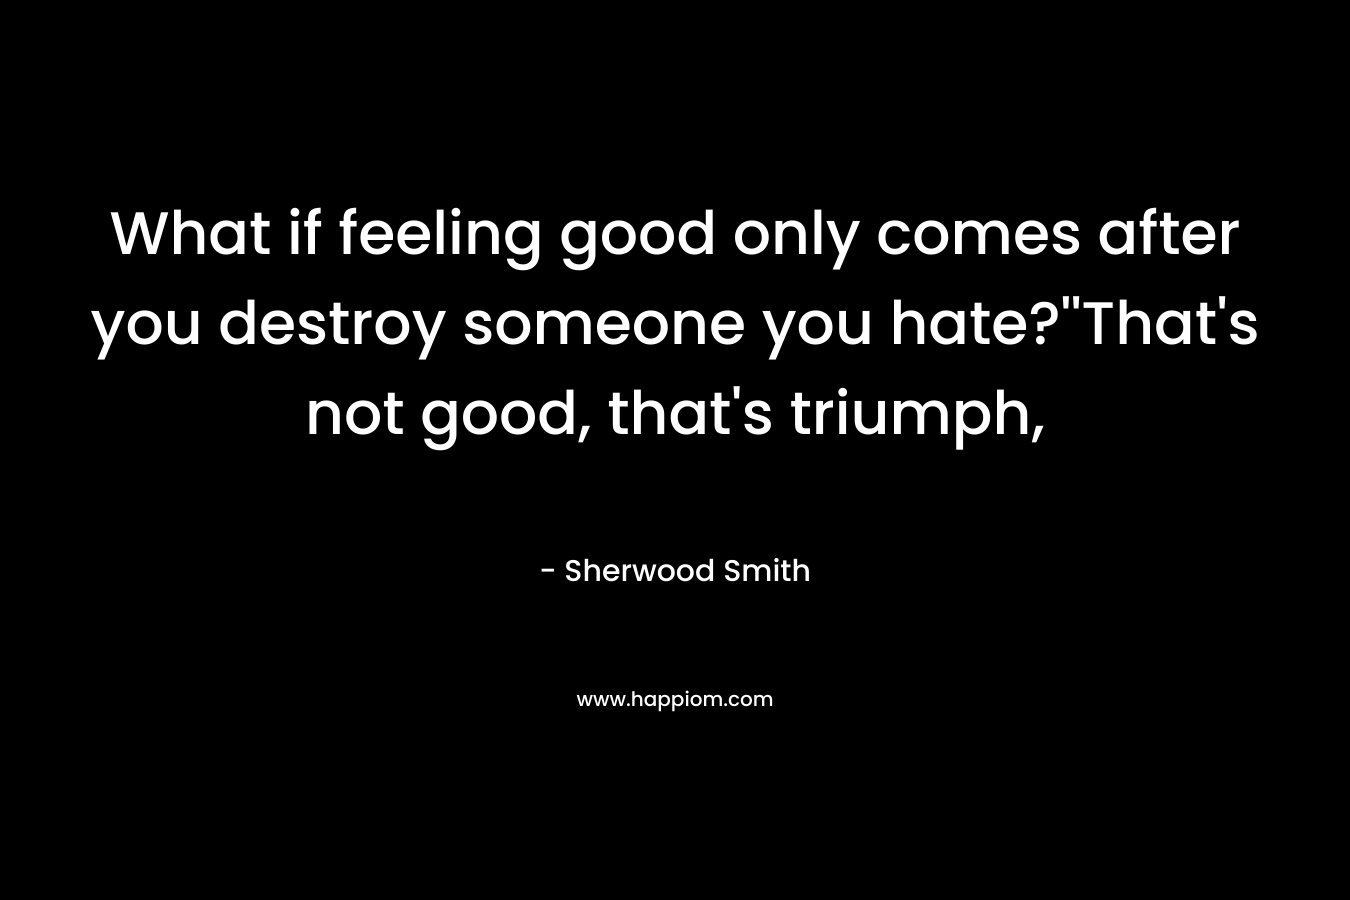 What if feeling good only comes after you destroy someone you hate?''That's not good, that's triumph,